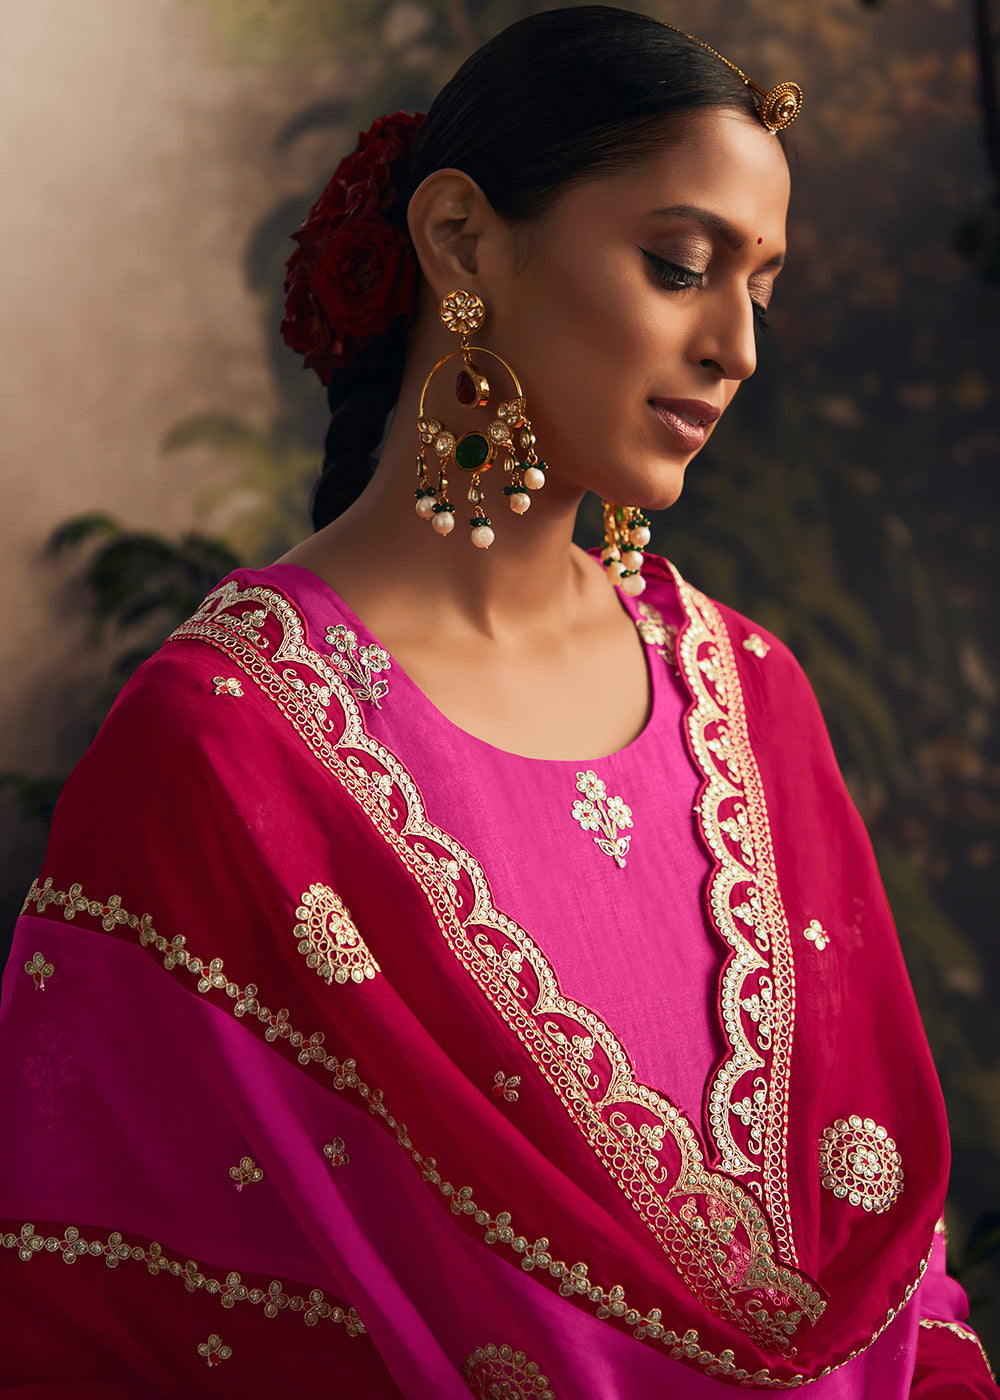 Buy Now Silk Modale Magenta Pink Embroidered Festive Salwar Suit Online in USA, UK, Canada, Germany, Australia & Worldwide at Empress Clothing. 